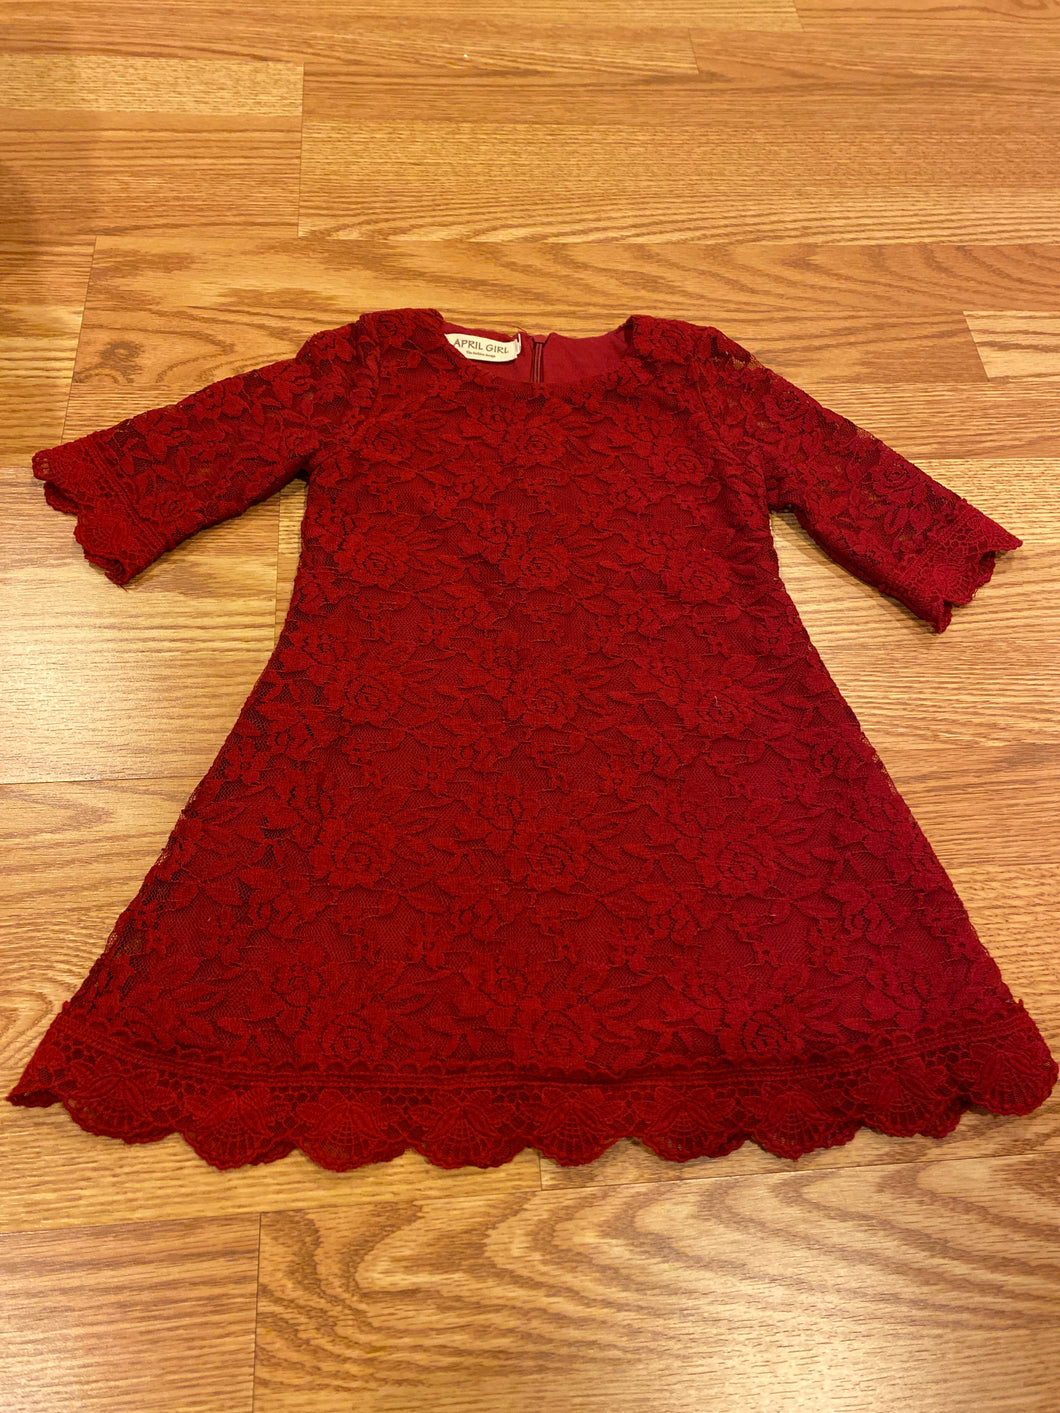 April Girl Red Lace Dress - Like New!  2T